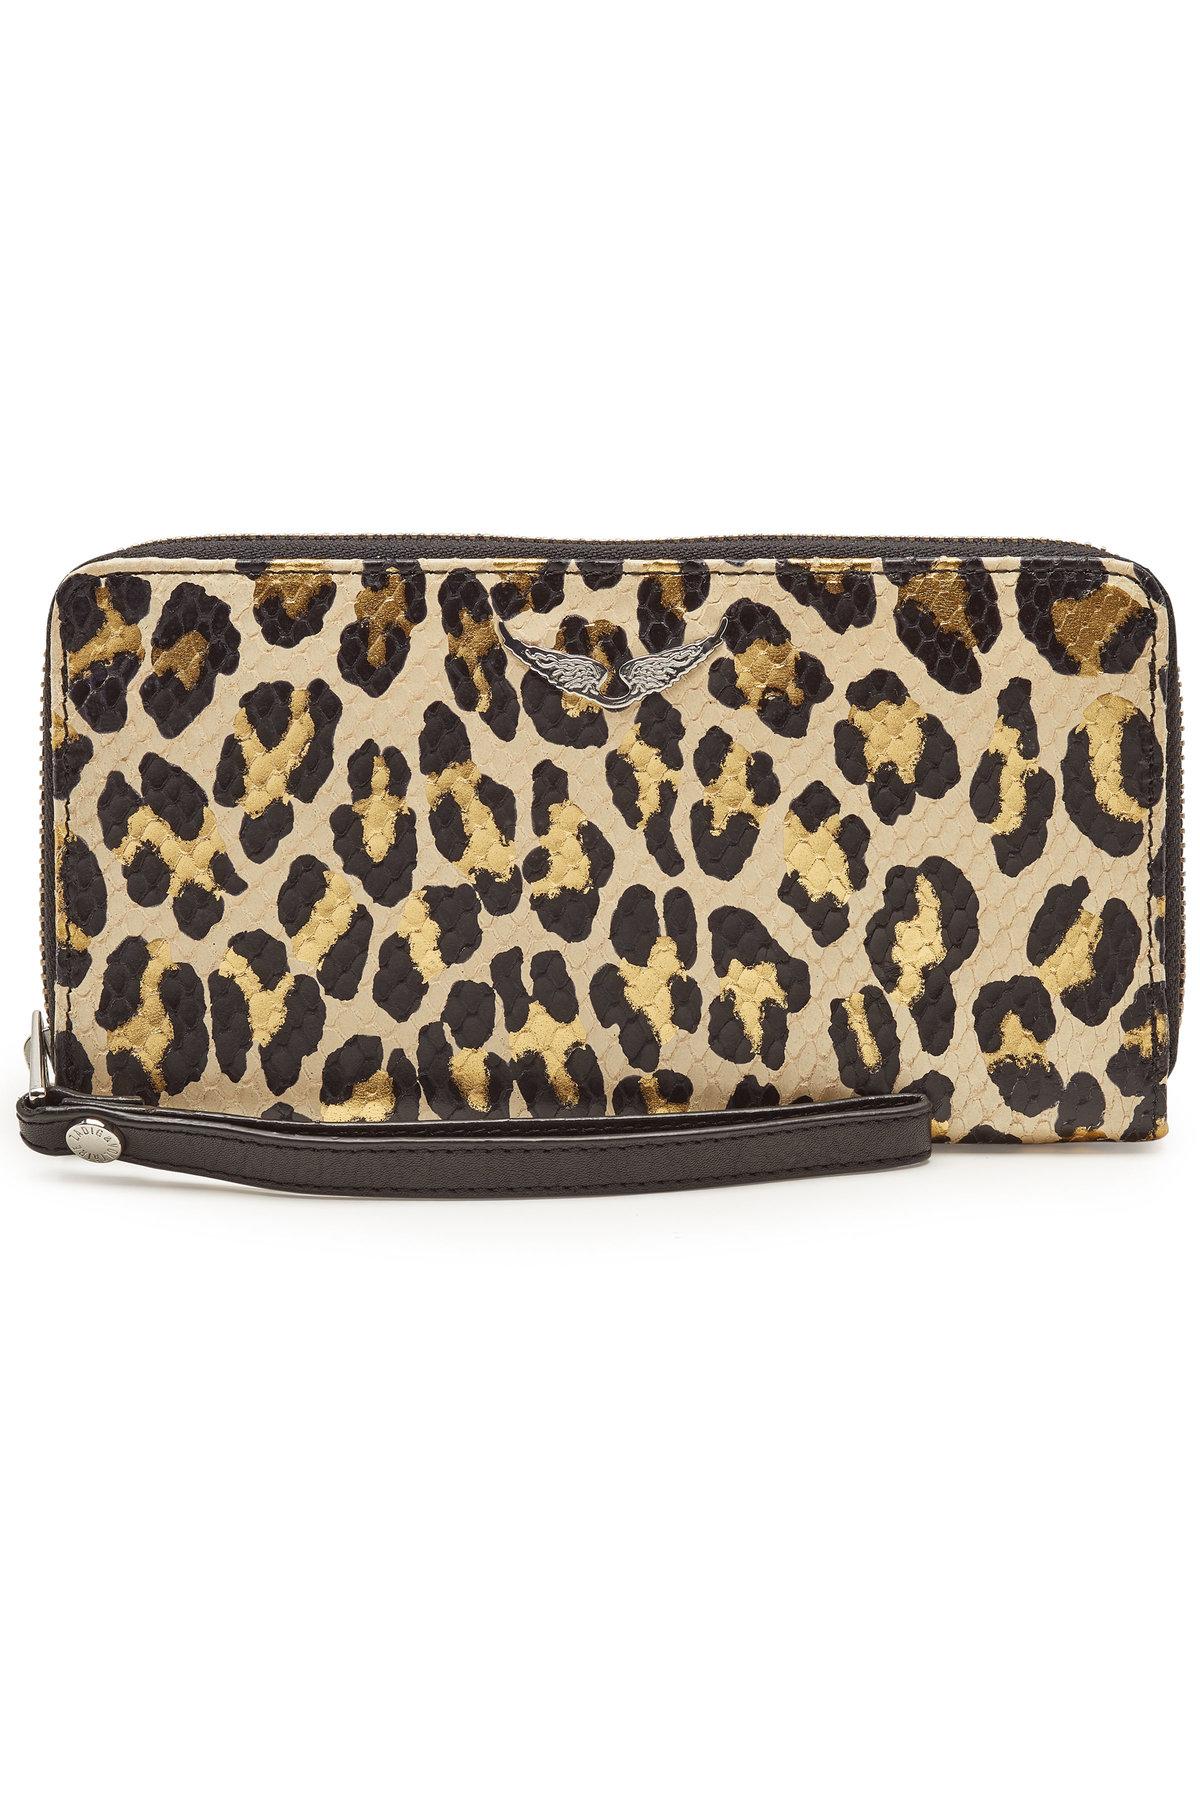 Lyst - Zadig & Voltaire Compagnon Savage Animal Print Leather Wallet